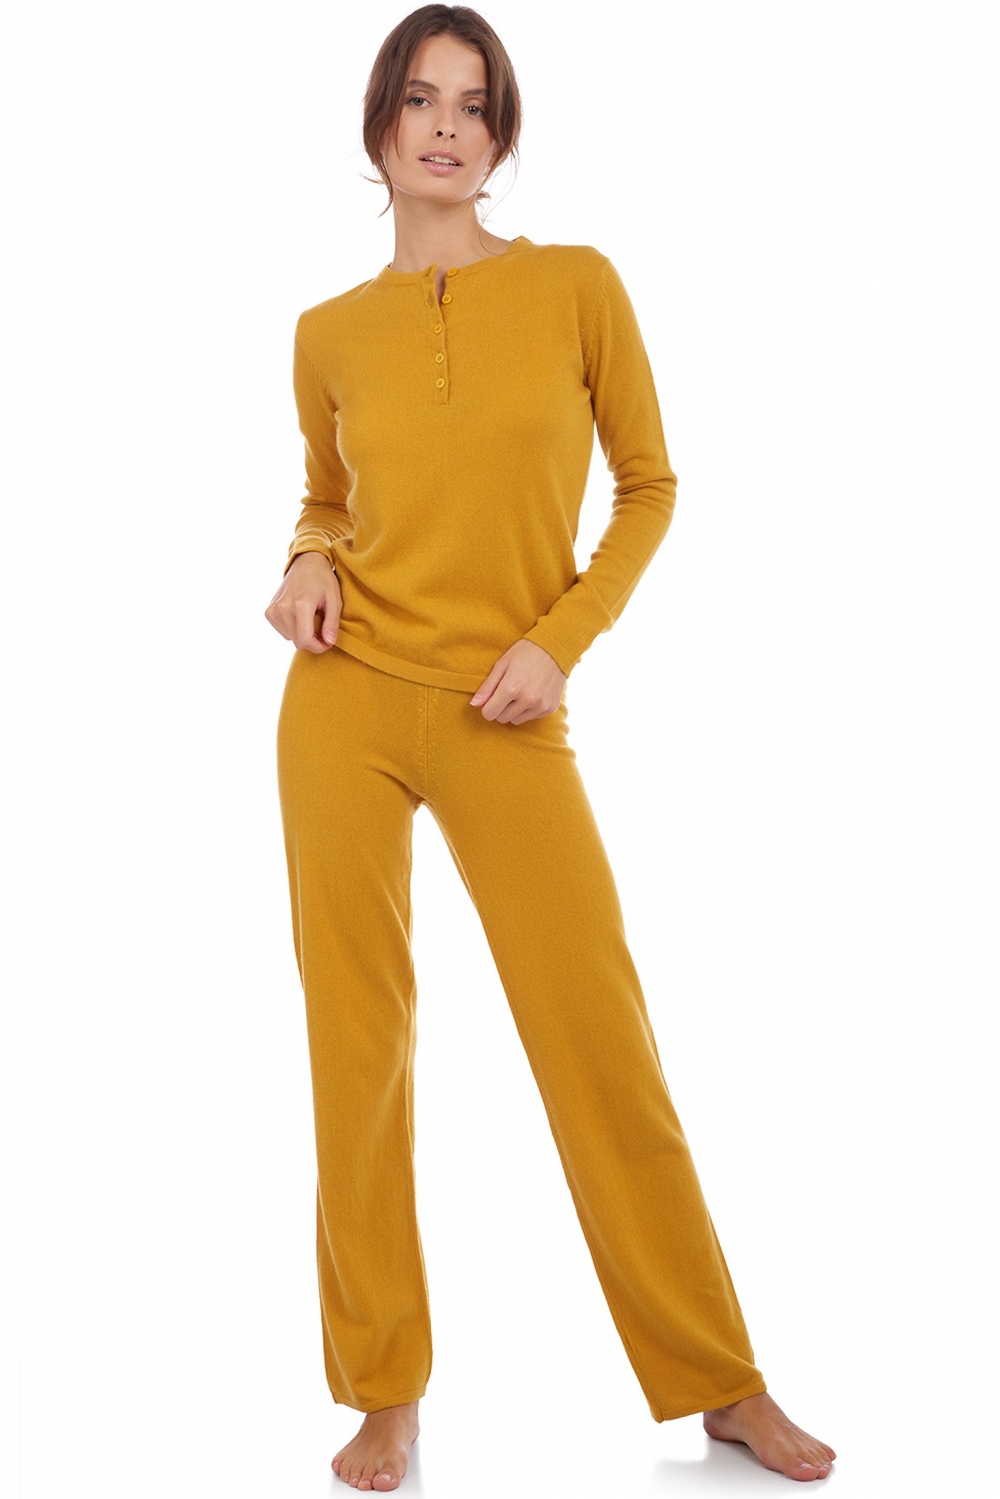 Cashmere accessories cocooning loan mustard 3xl